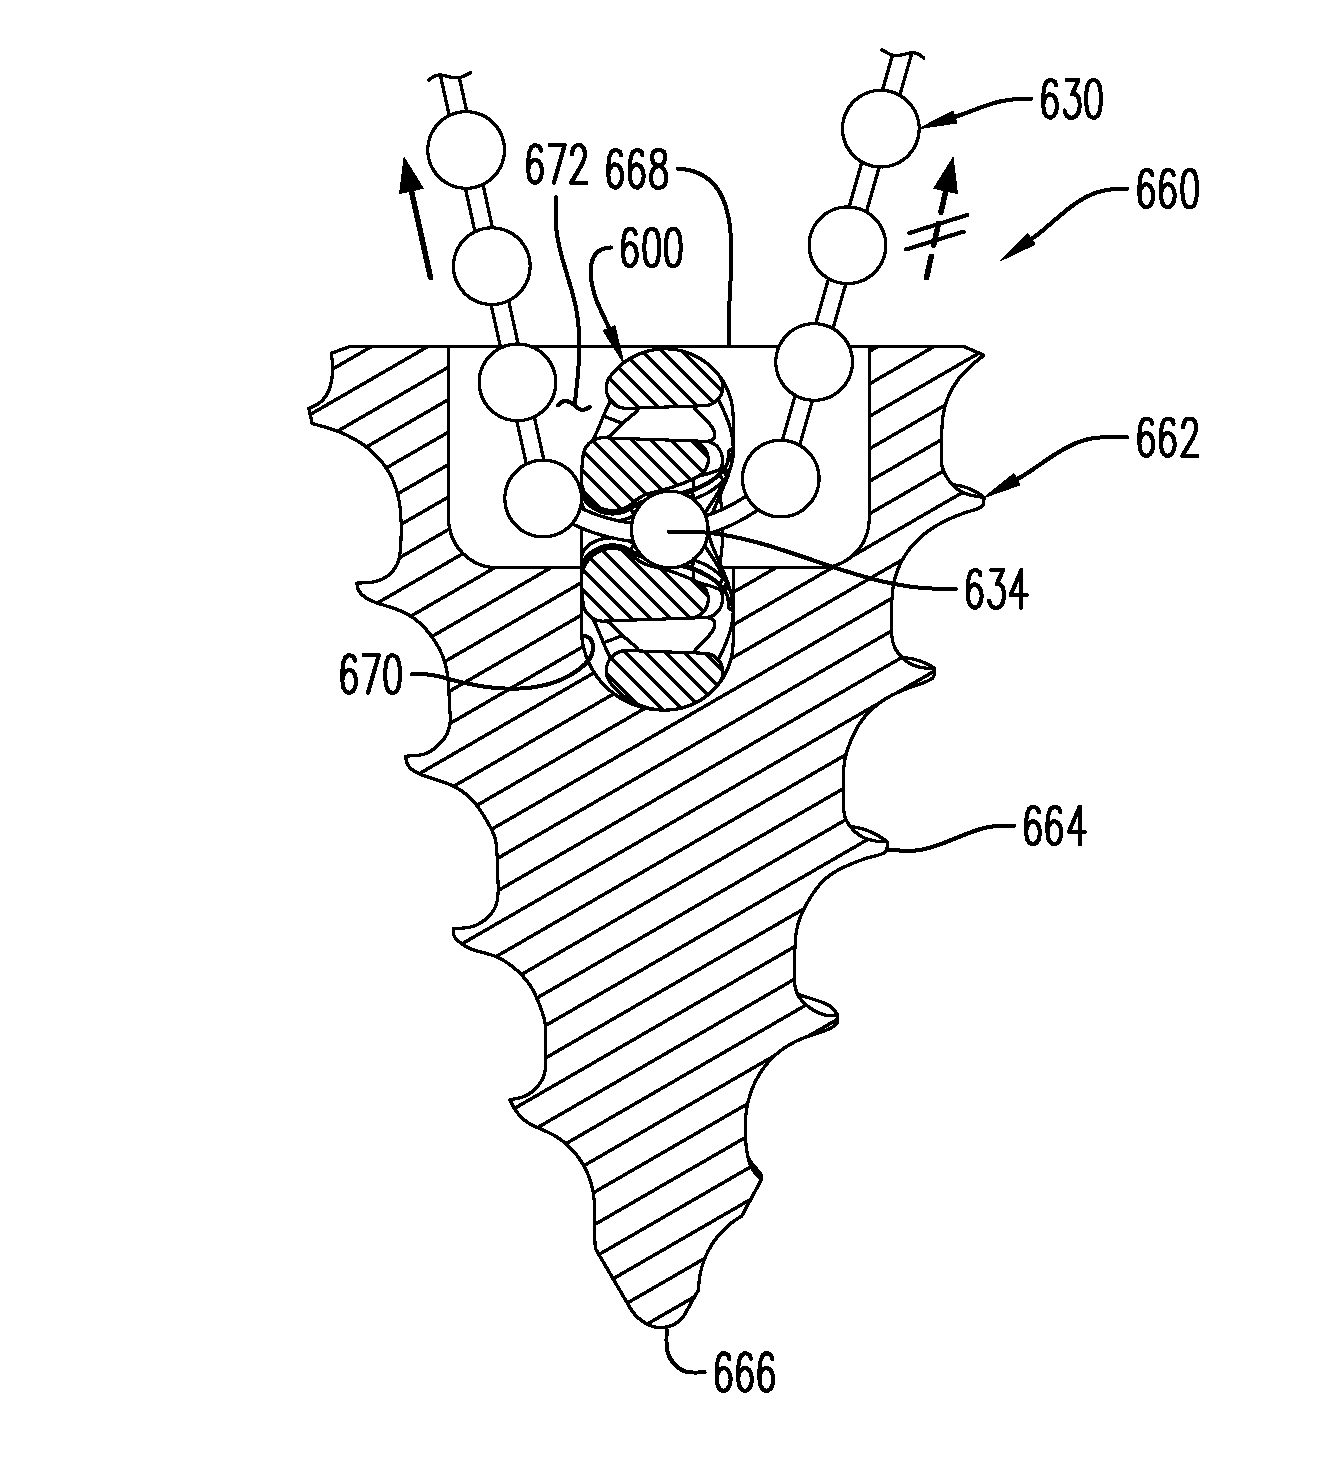 Surgical suture system, tissue restraints, and tissue anchors